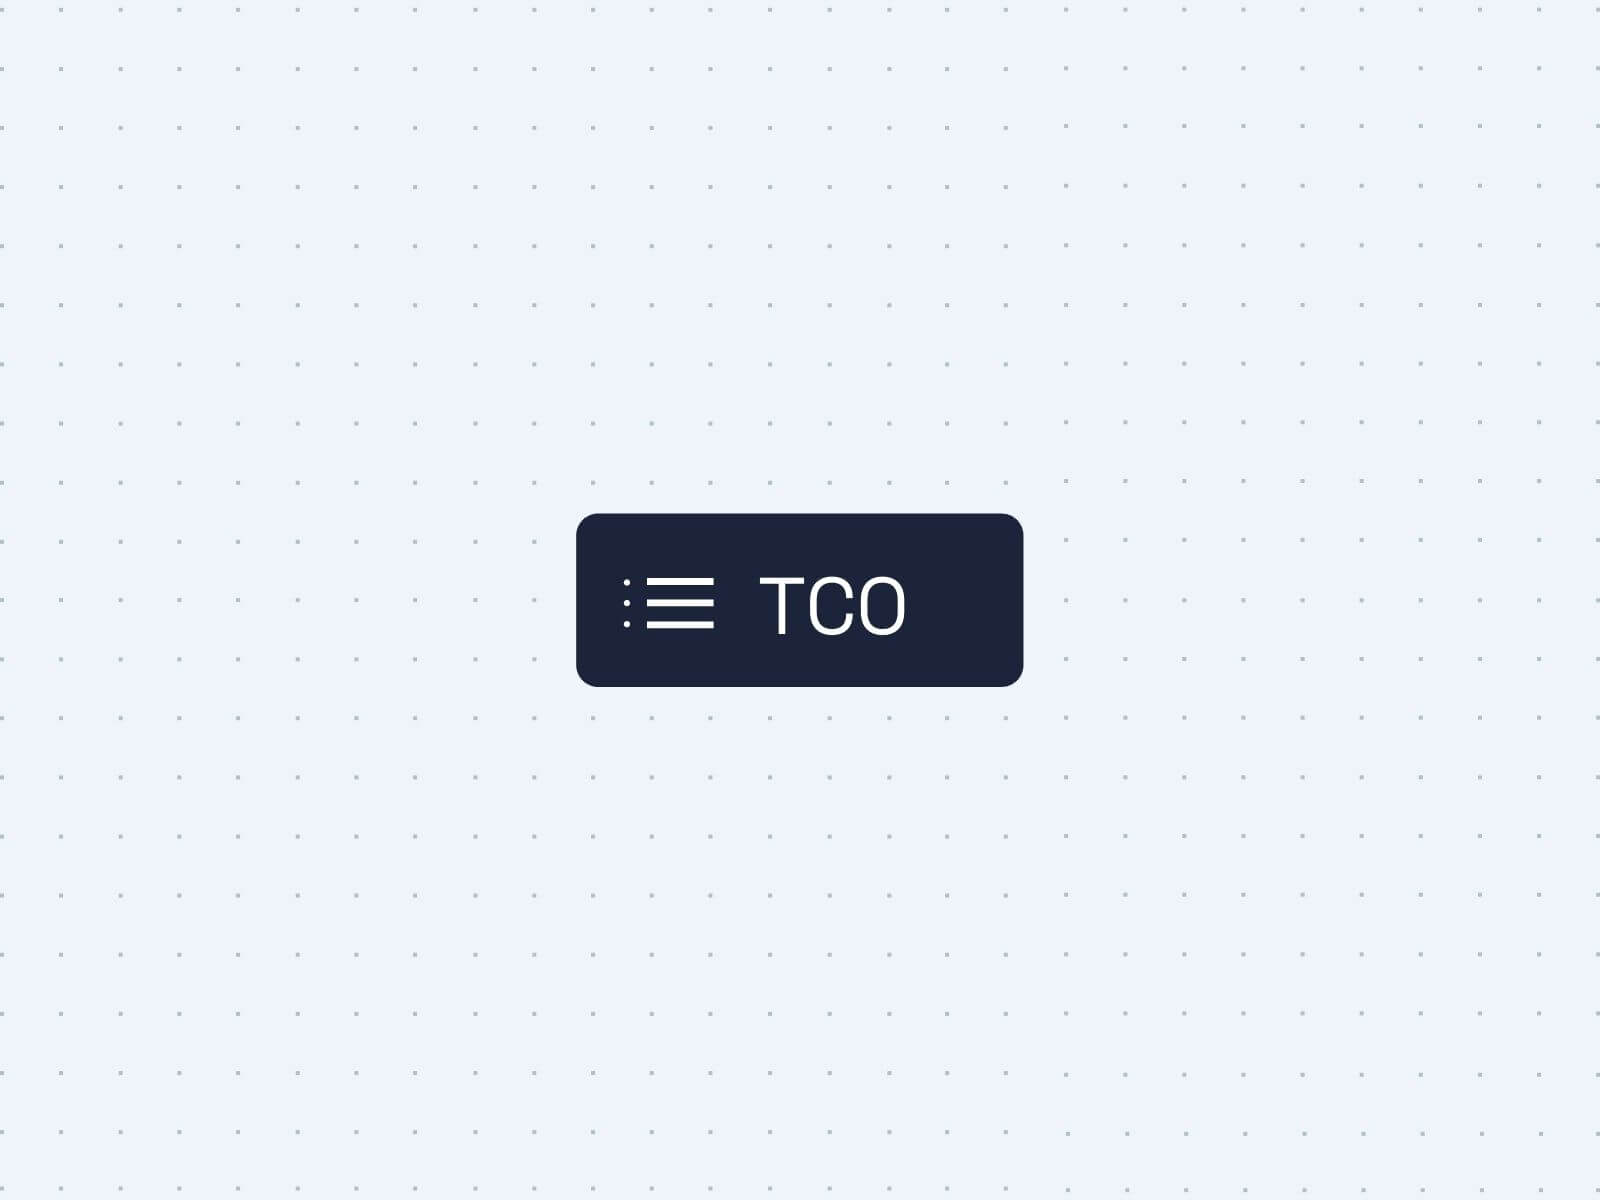 TCO - Total Cost of Ownership